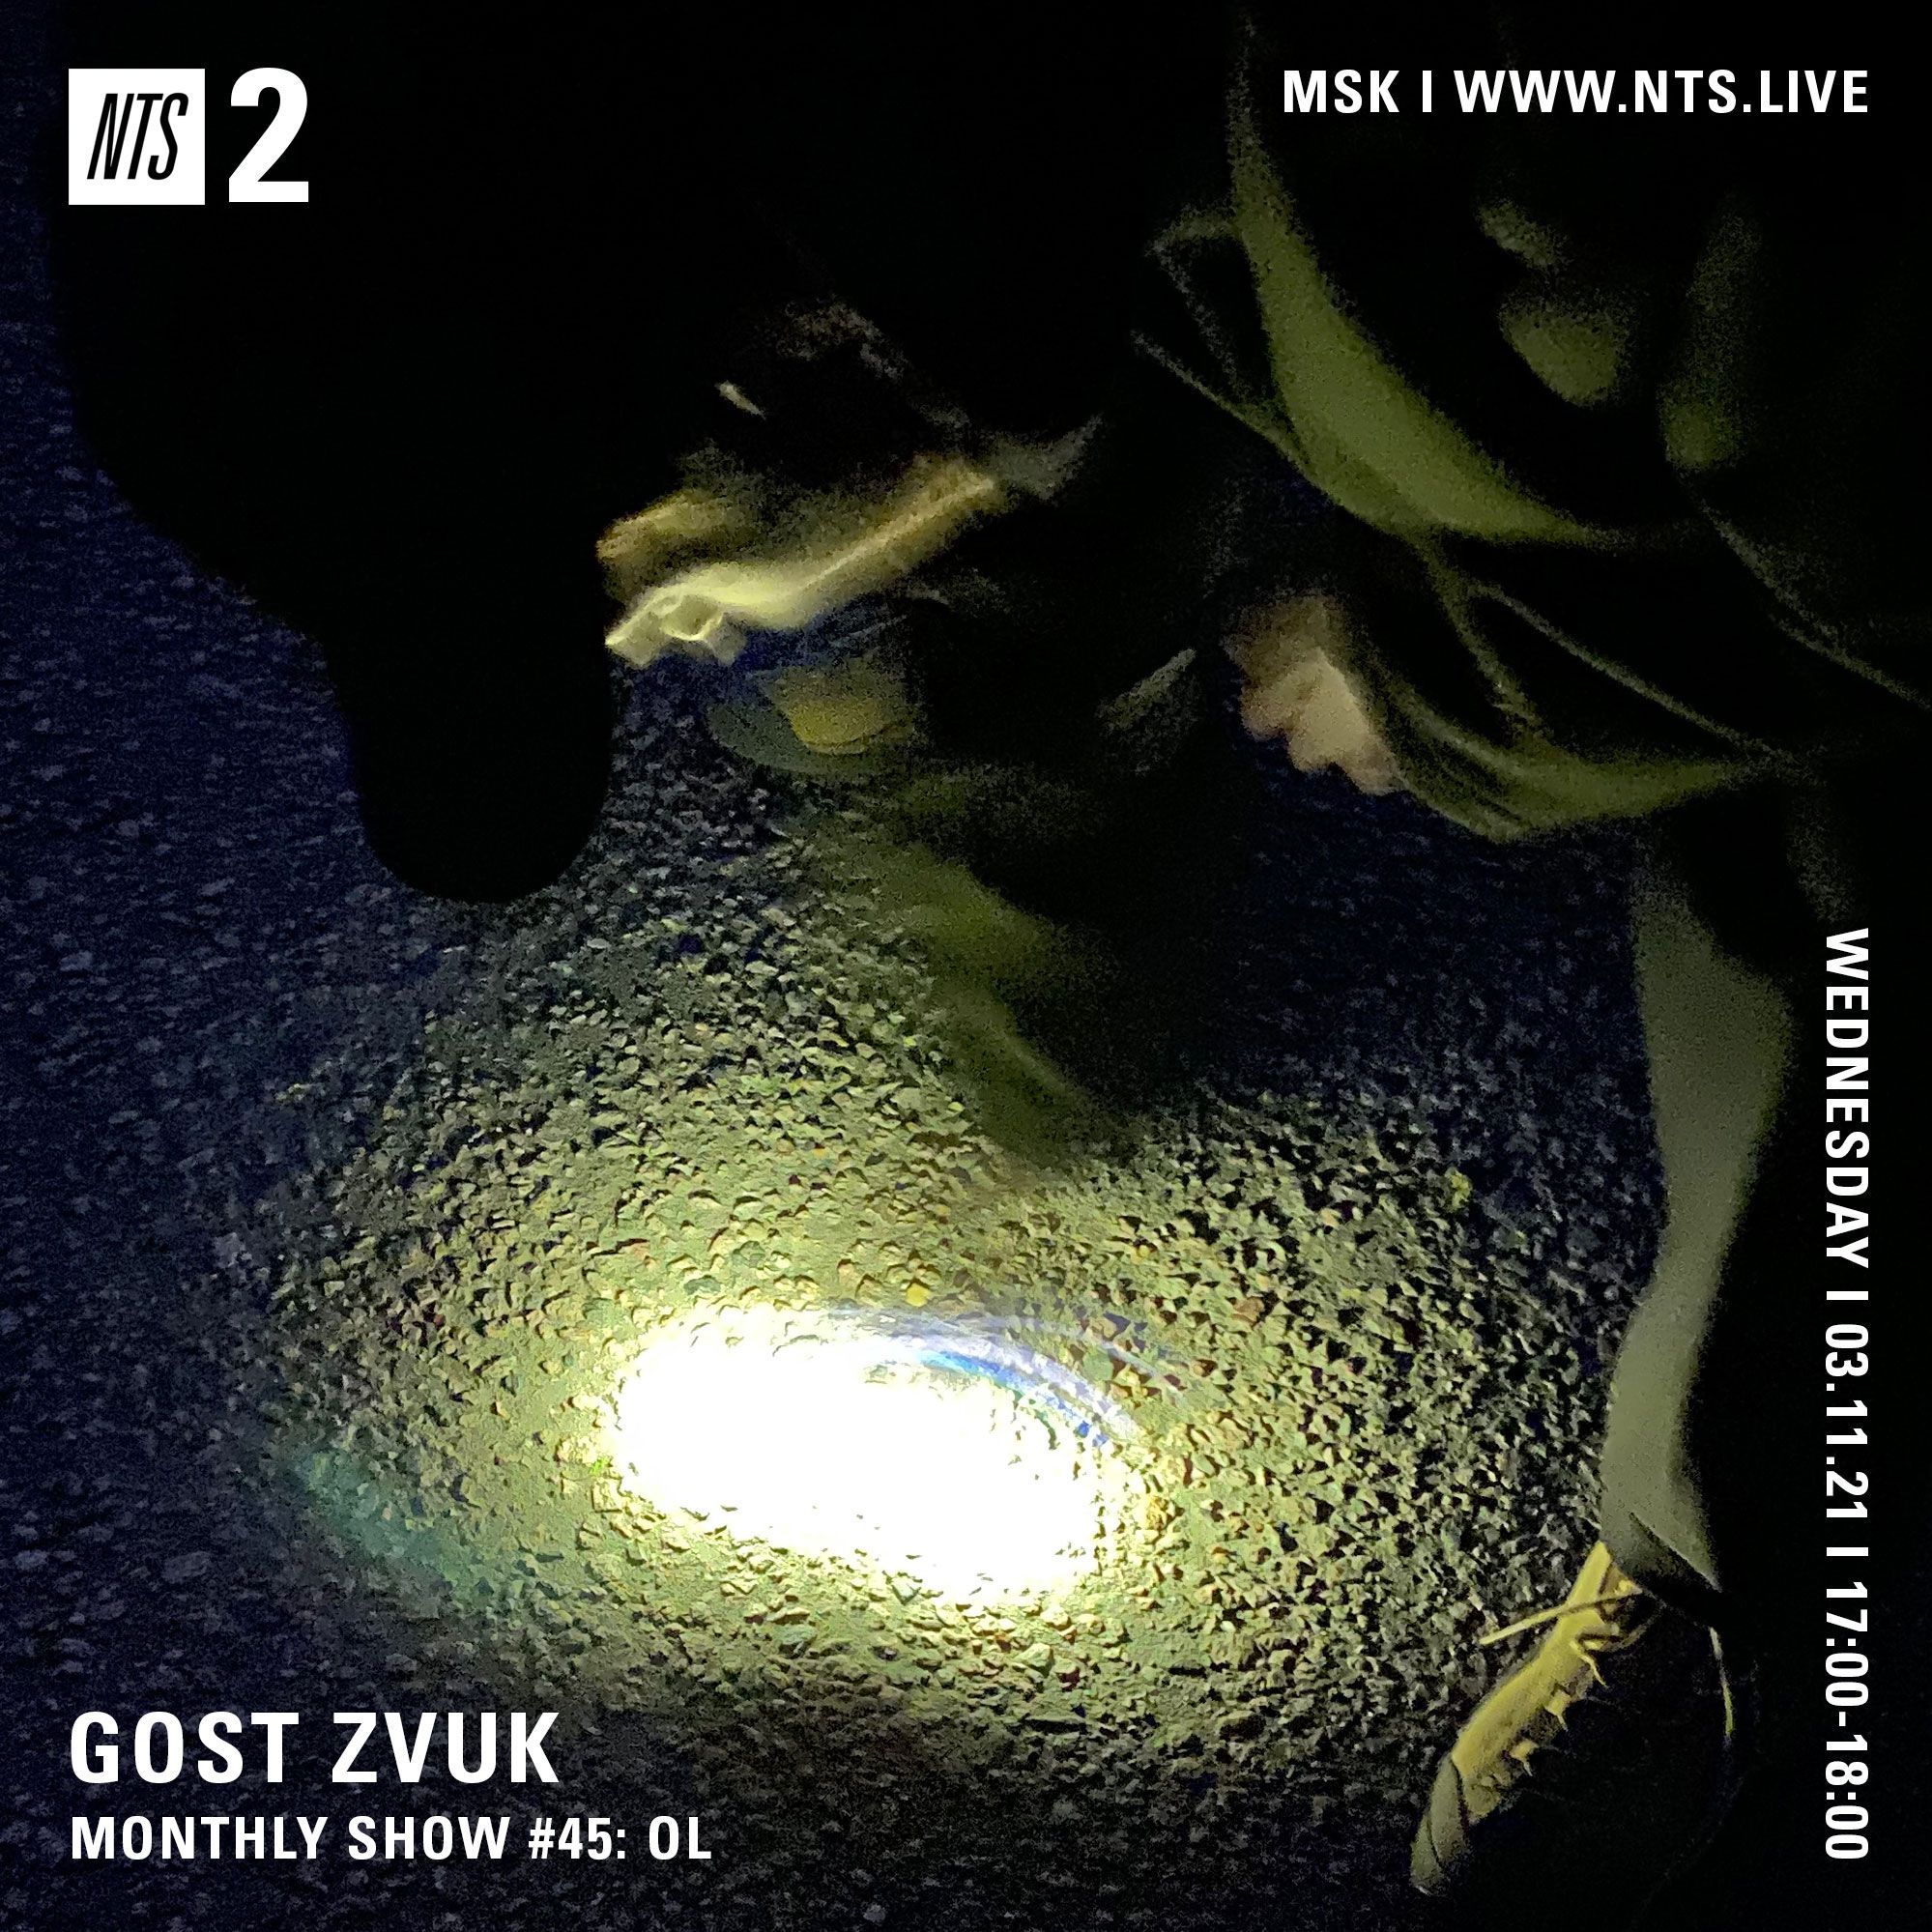 Télécharger GOST ZVUK x NTS monthly show #45 w/ OL